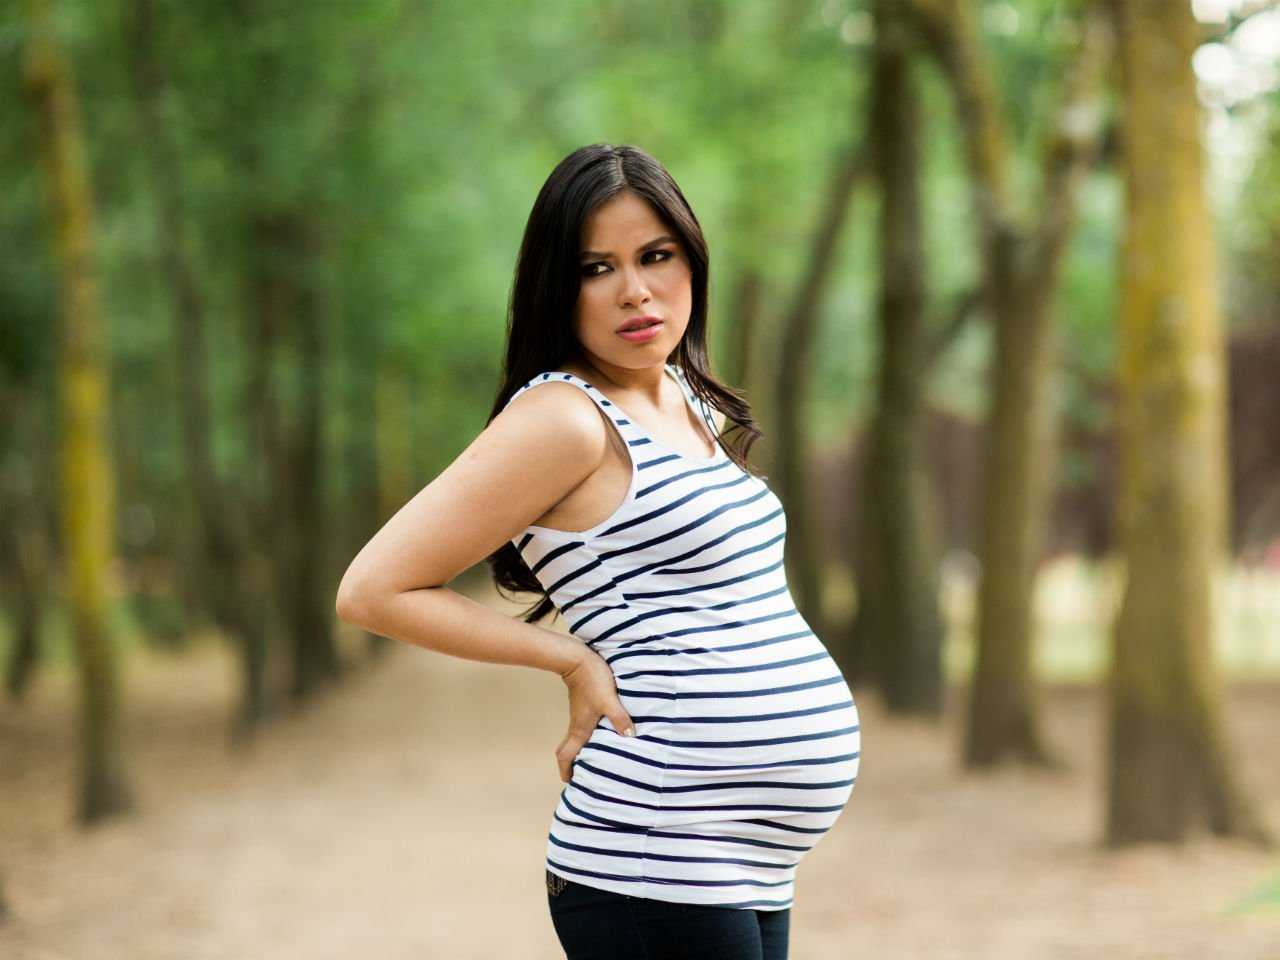 Fashionable and Fit: Pregnancy For Beauty-Conscious Women